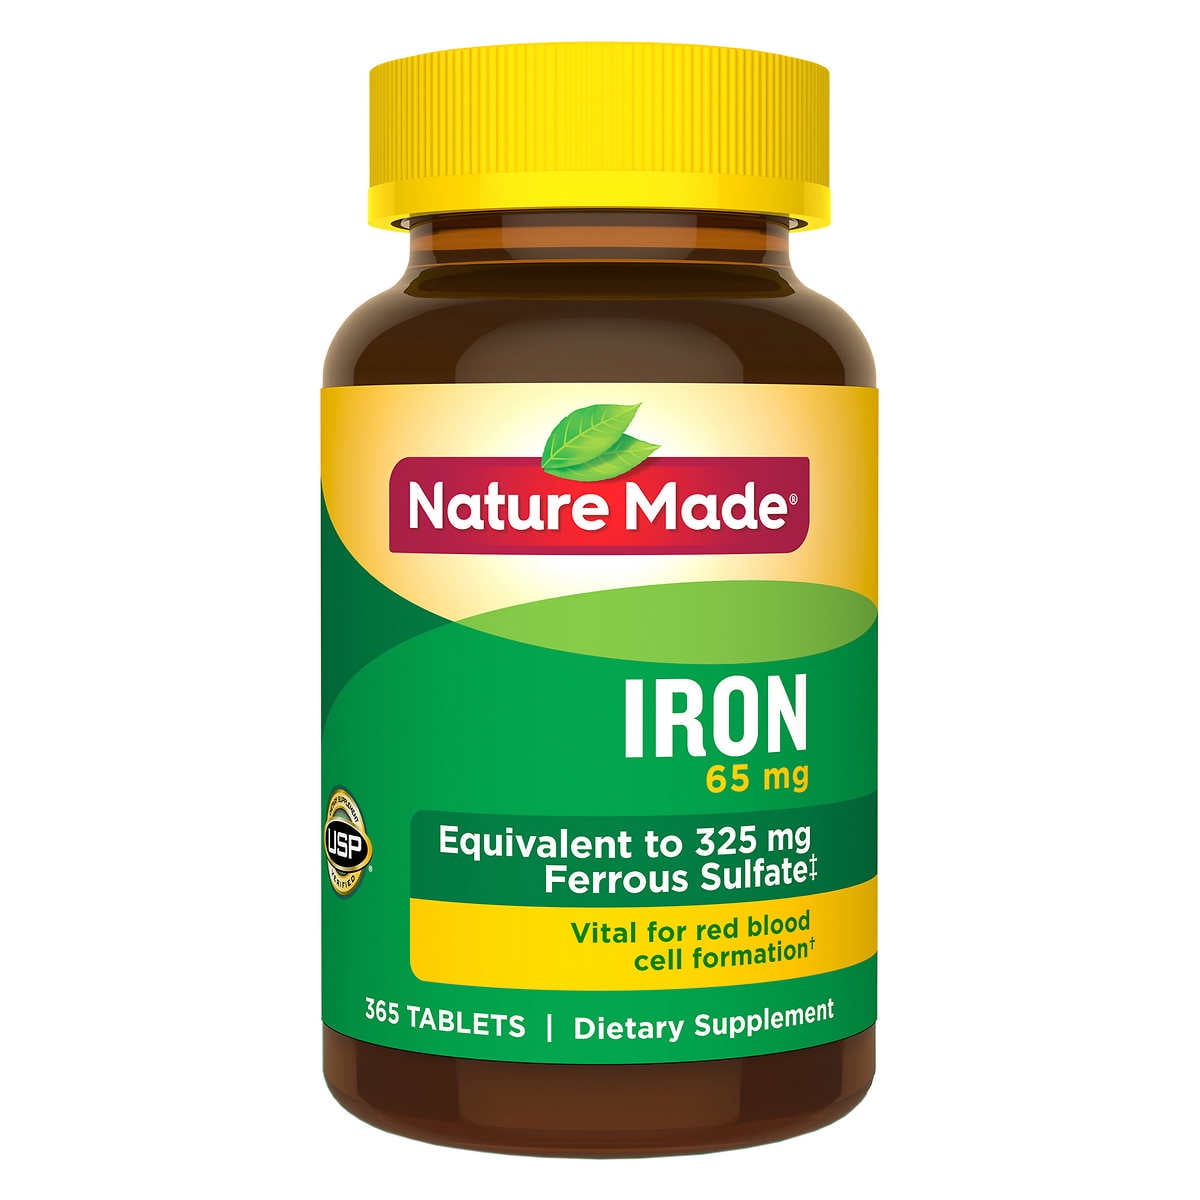 Nature Made Iron 65 mg | 365 Tablets | Dietary Supplement